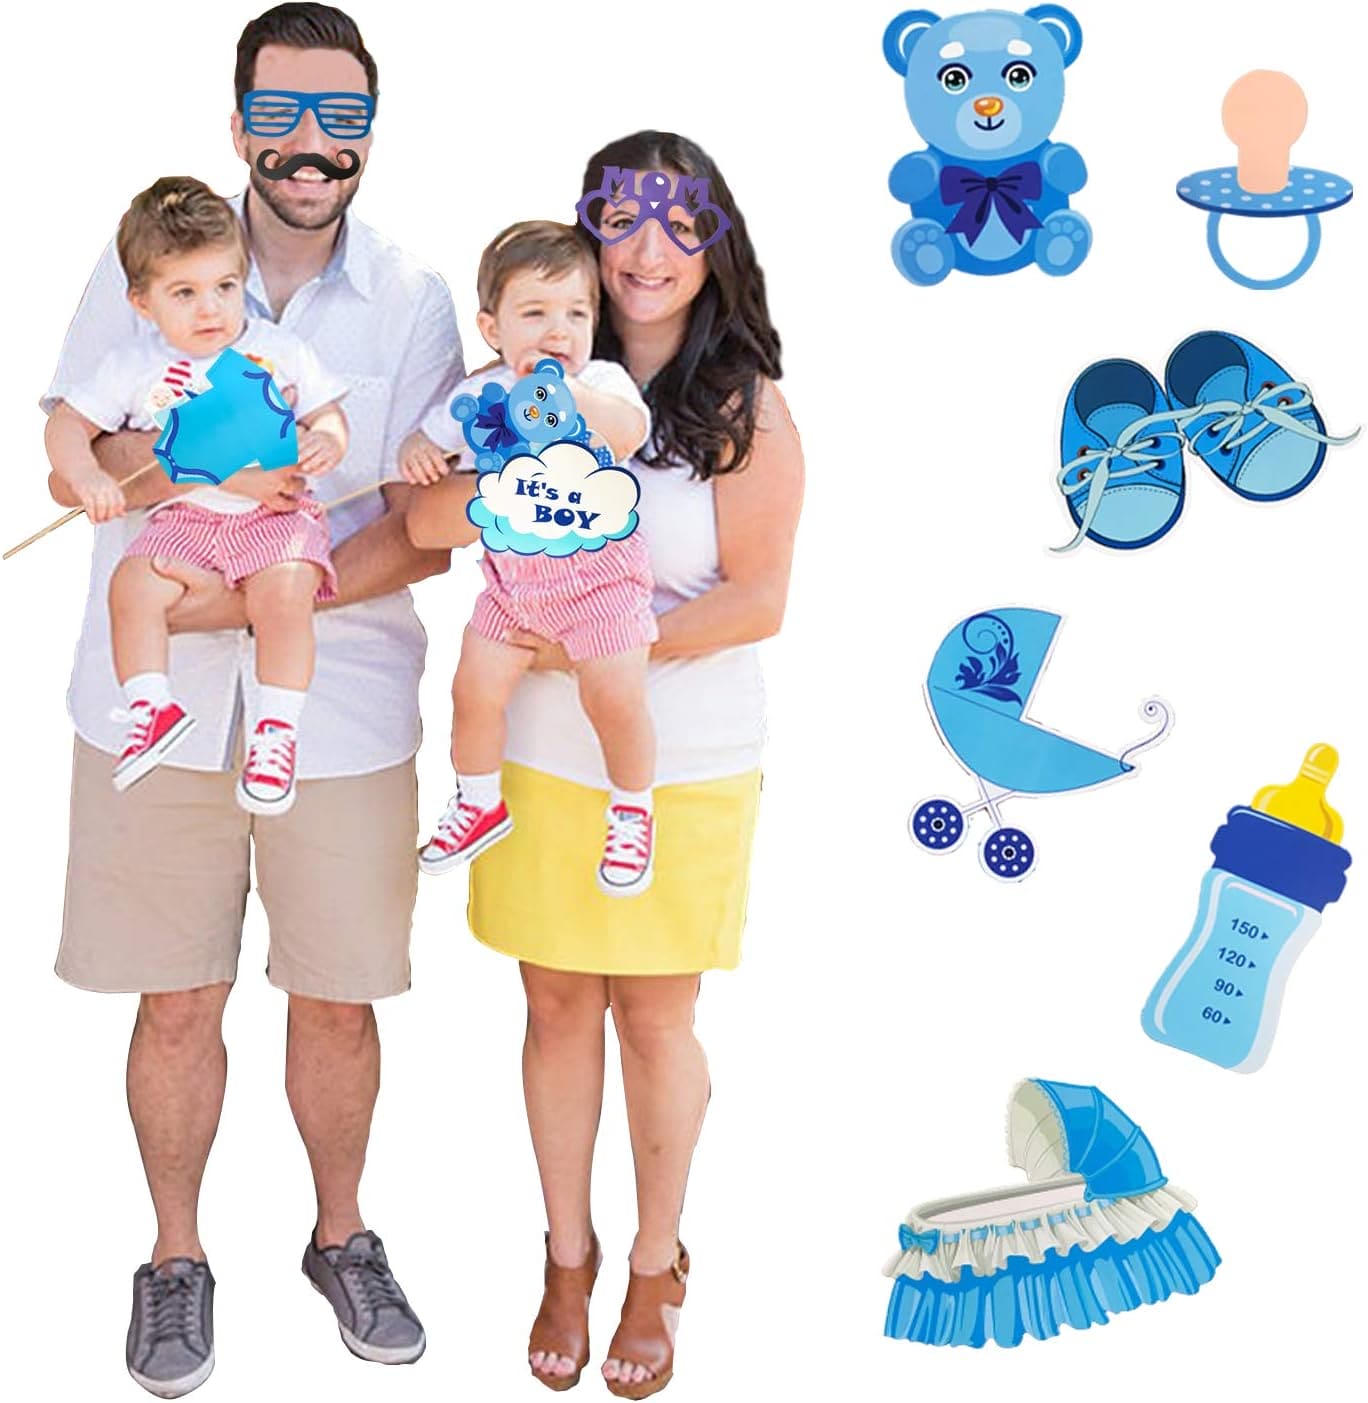 30 Pcs Baby Shower Props, Twins Kids Photo Booth, Welcome Oh Sweet Baby Shower Party Supplies